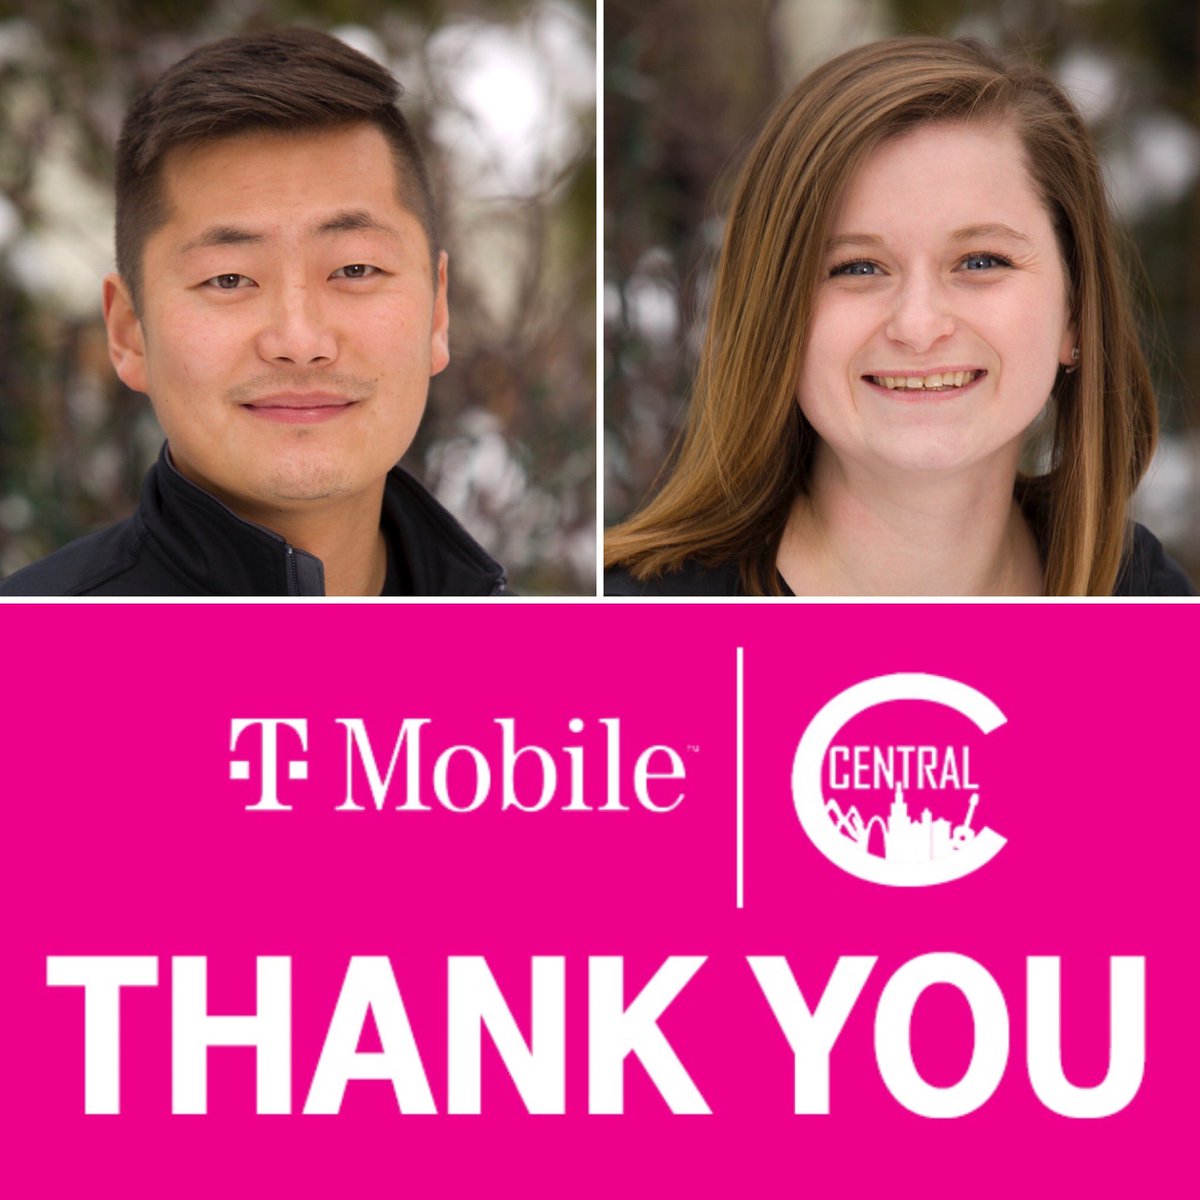 I am thankful on this #CentralThanks for Adam and Lindsey who put together a plan on how to develop our teams in this new environment and rolled it out to the market to help us come back #FirstAndFast. You aren’t just helping people get through this, you are helping us thrive!